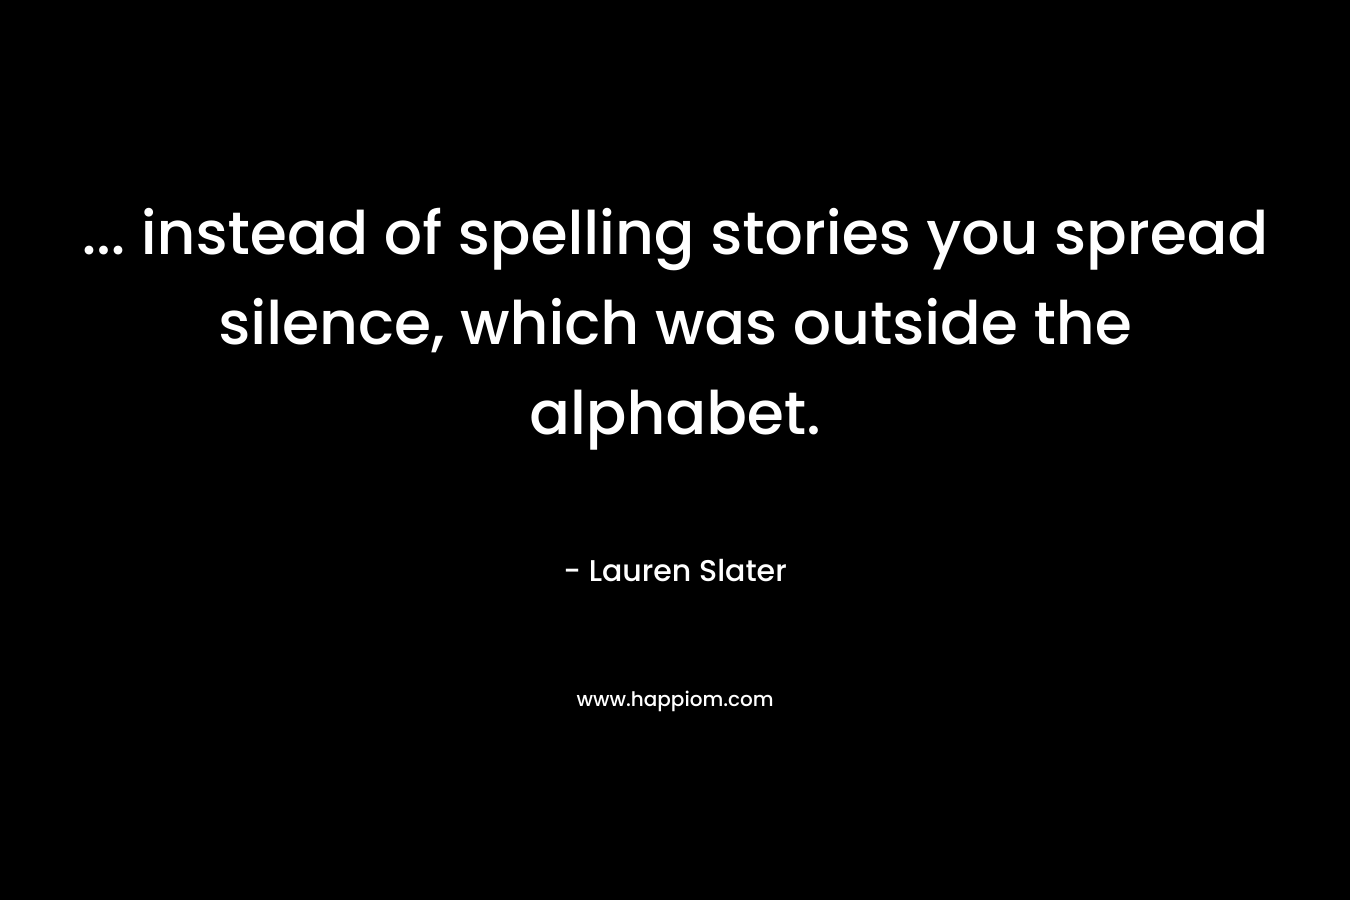 ... instead of spelling stories you spread silence, which was outside the alphabet.